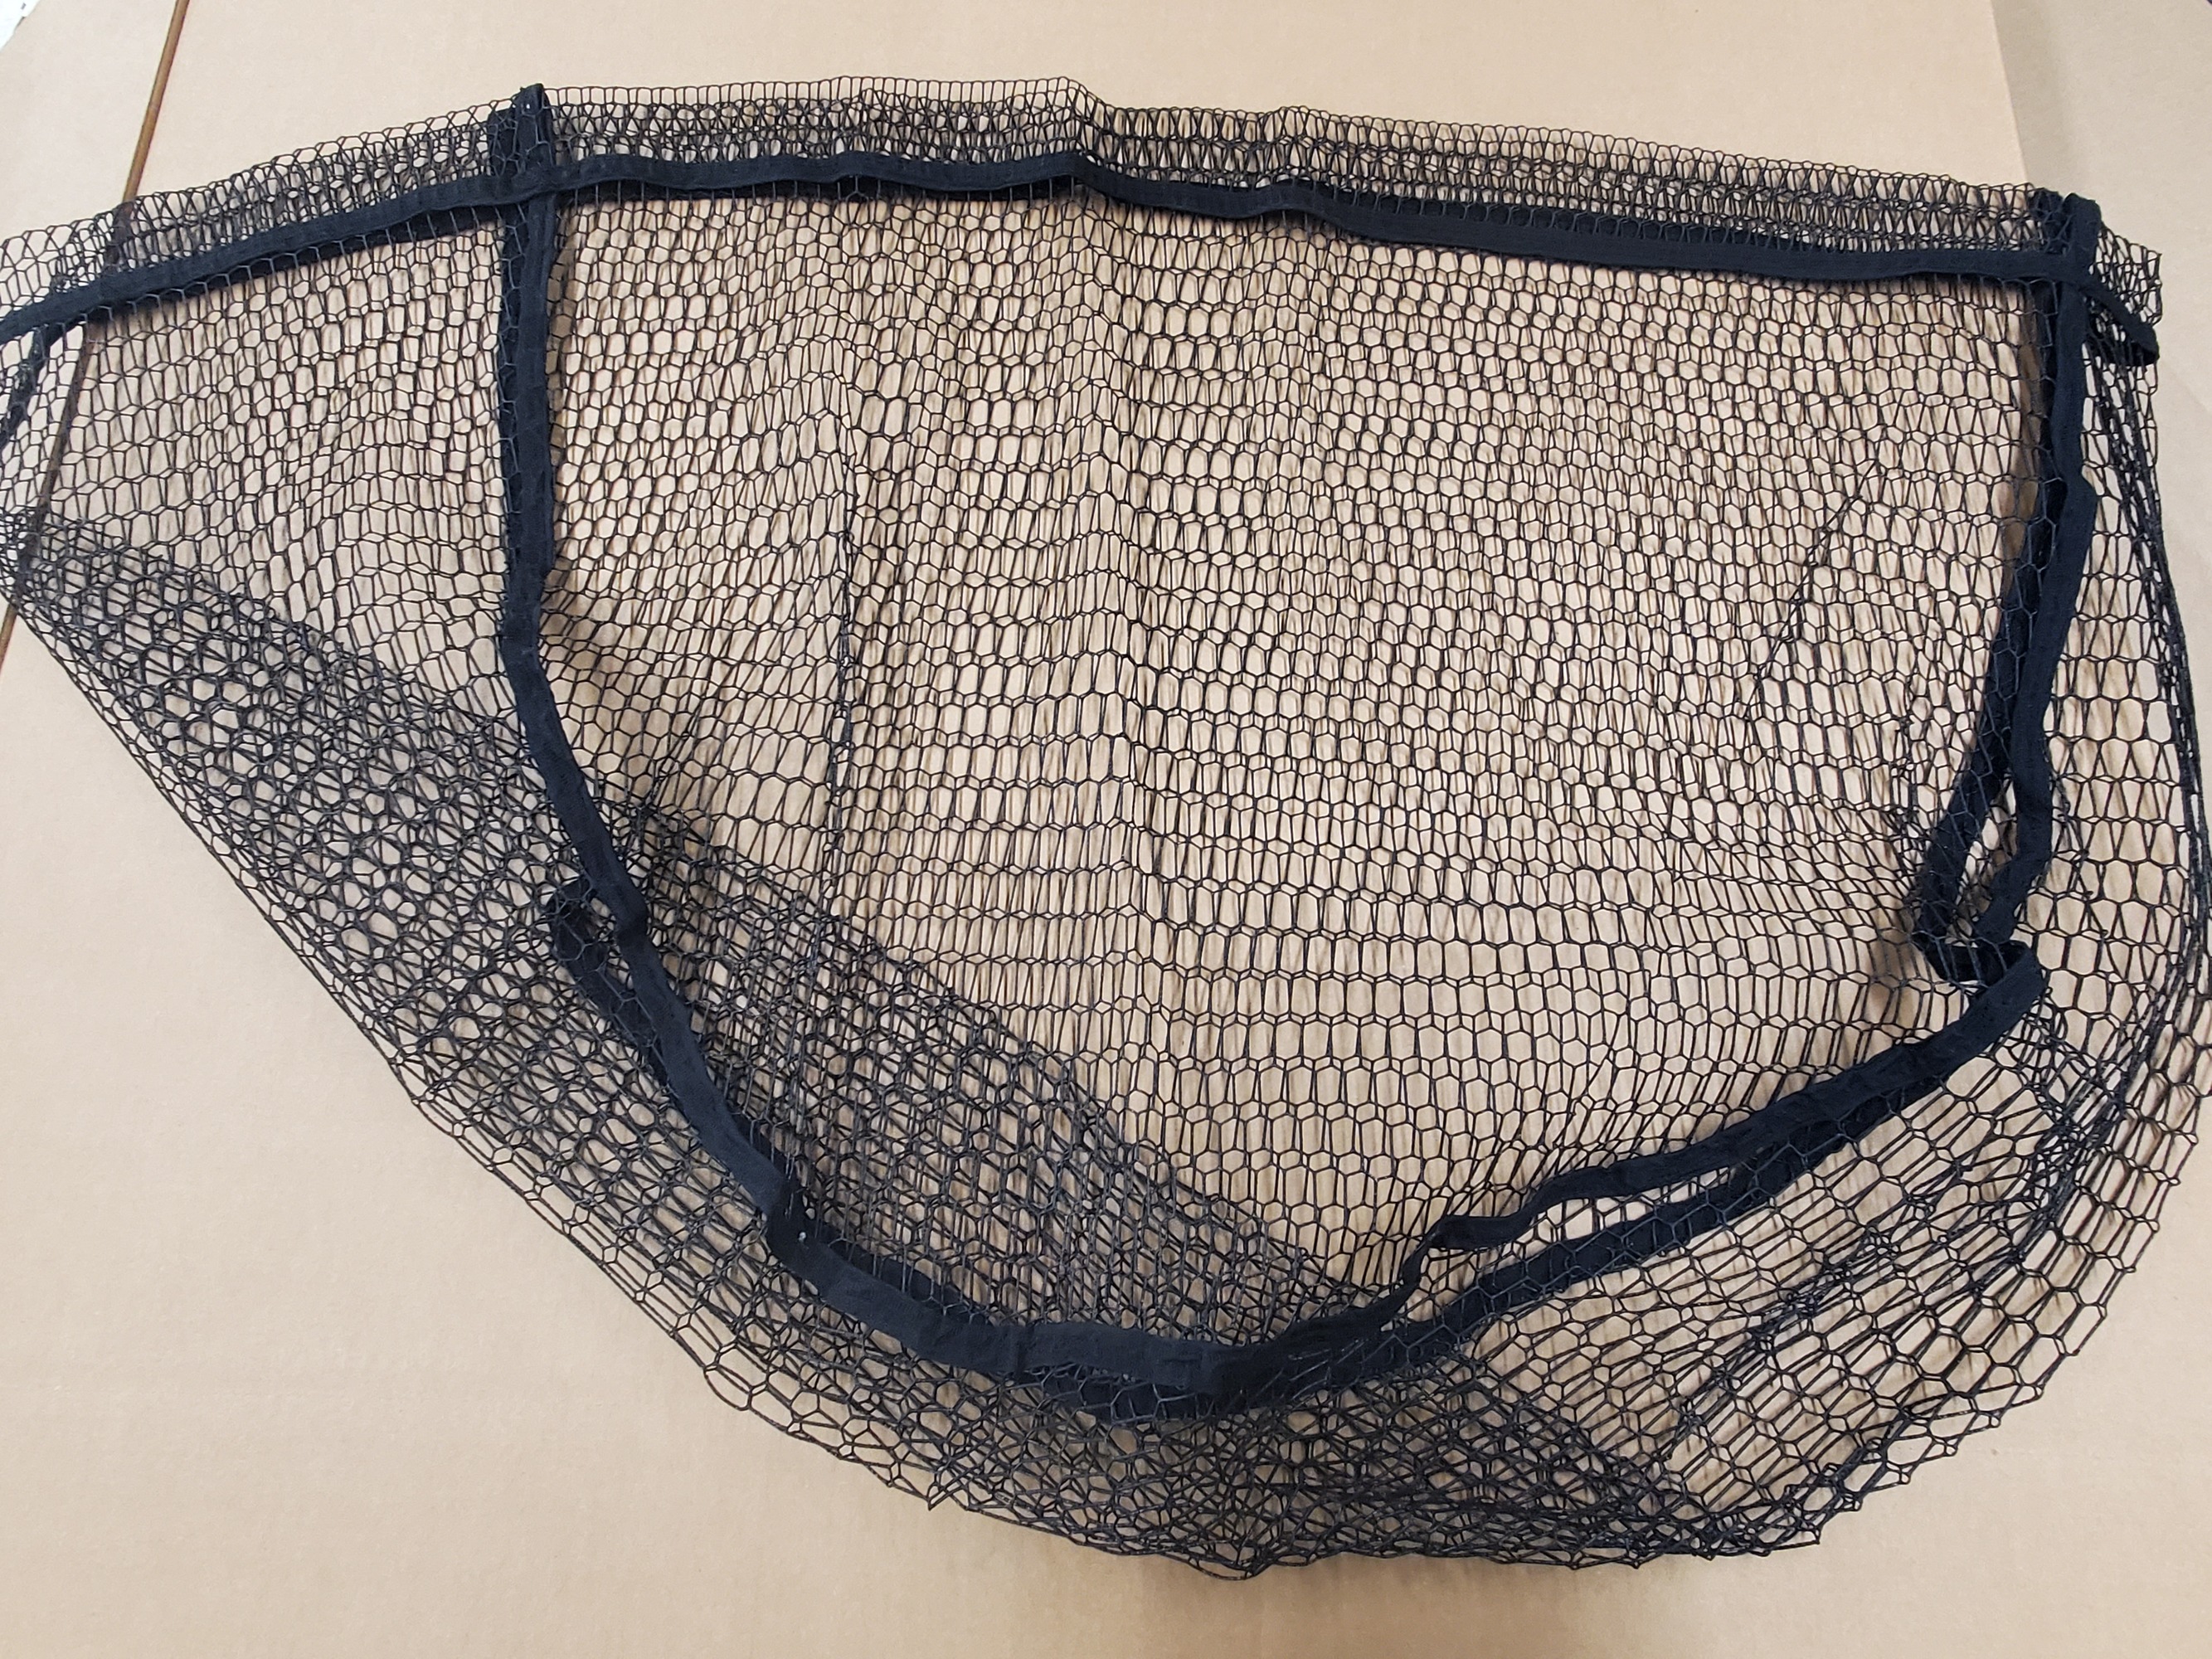 Cumings Knotless Replacement Net